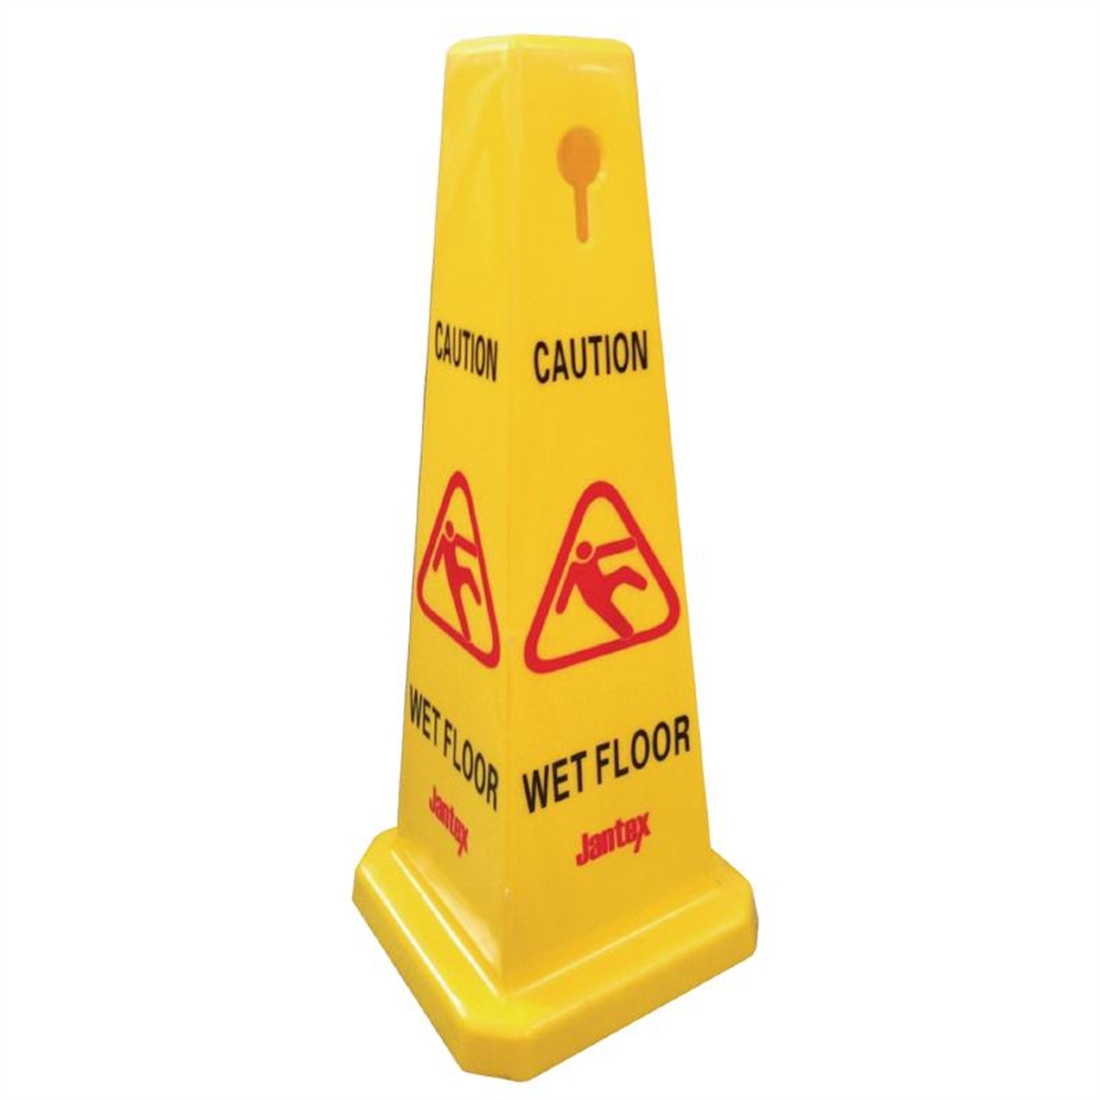 Jantex Cone Wet Floor Safety Sign